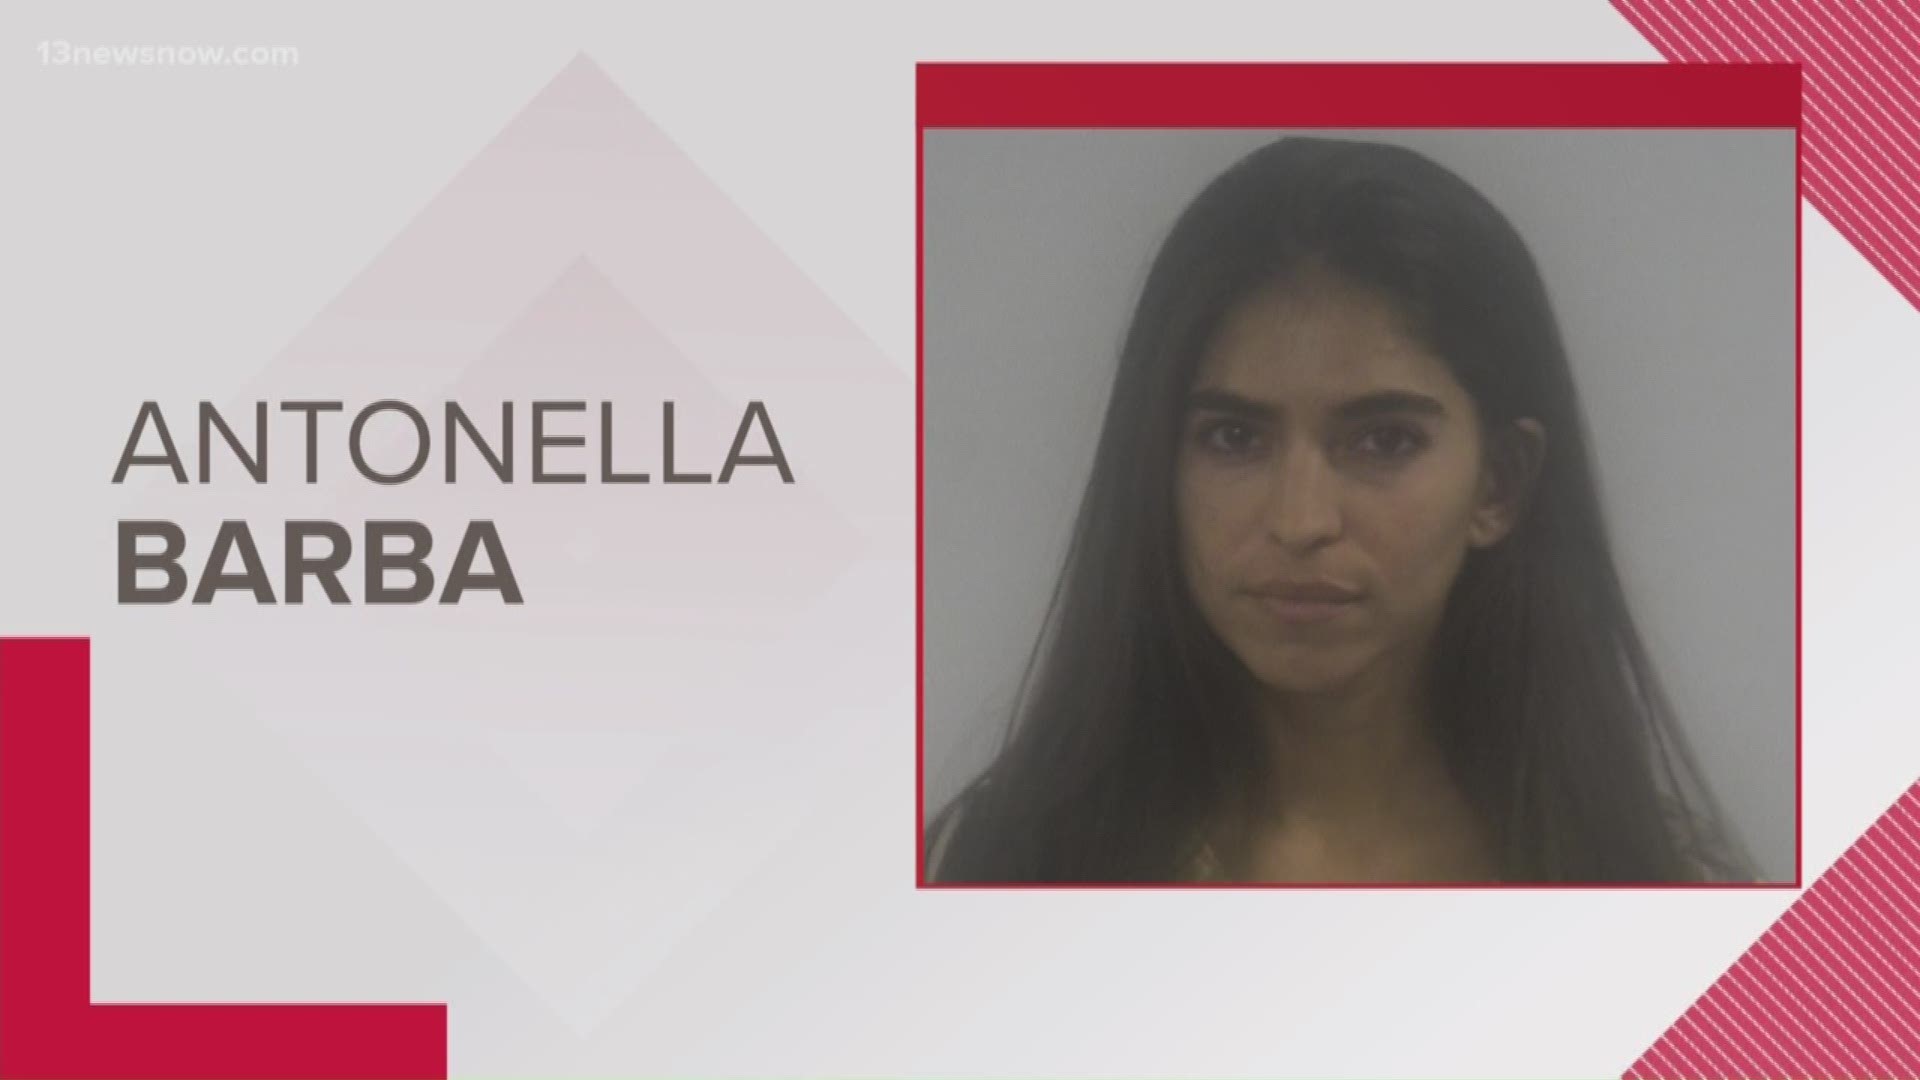 A judge just handed down the sentence for former 'American Idol' Contestant Antonella Barba. She admitted to sell 2 pounds of drugs.